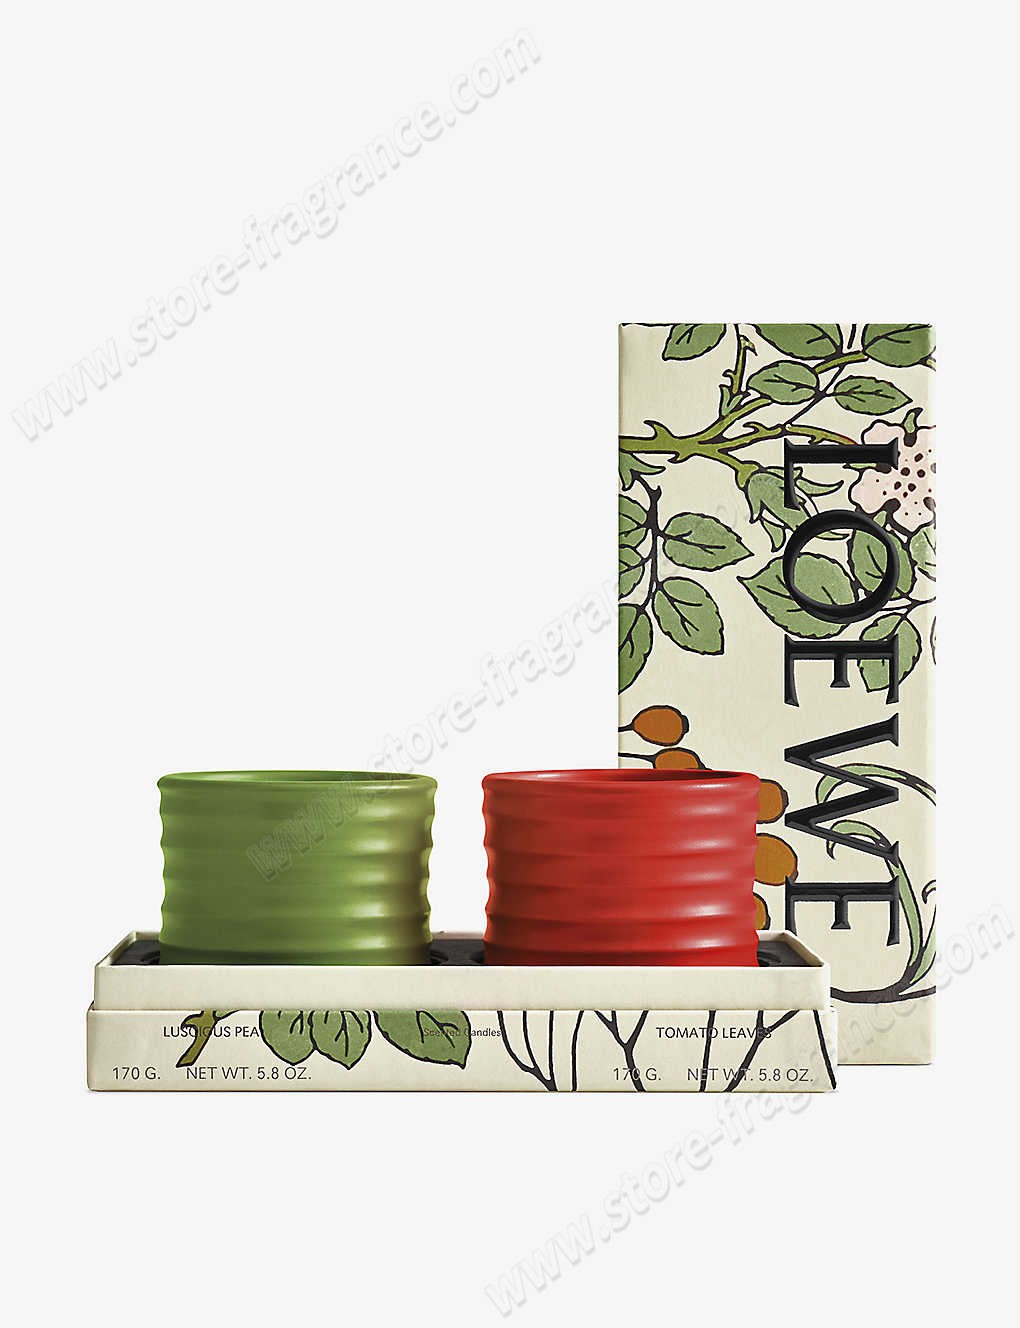 LOEWE/Luscious Pea and Tomato Leaves scented candle gift set Limit Offer - LOEWE/Luscious Pea and Tomato Leaves scented candle gift set Limit Offer